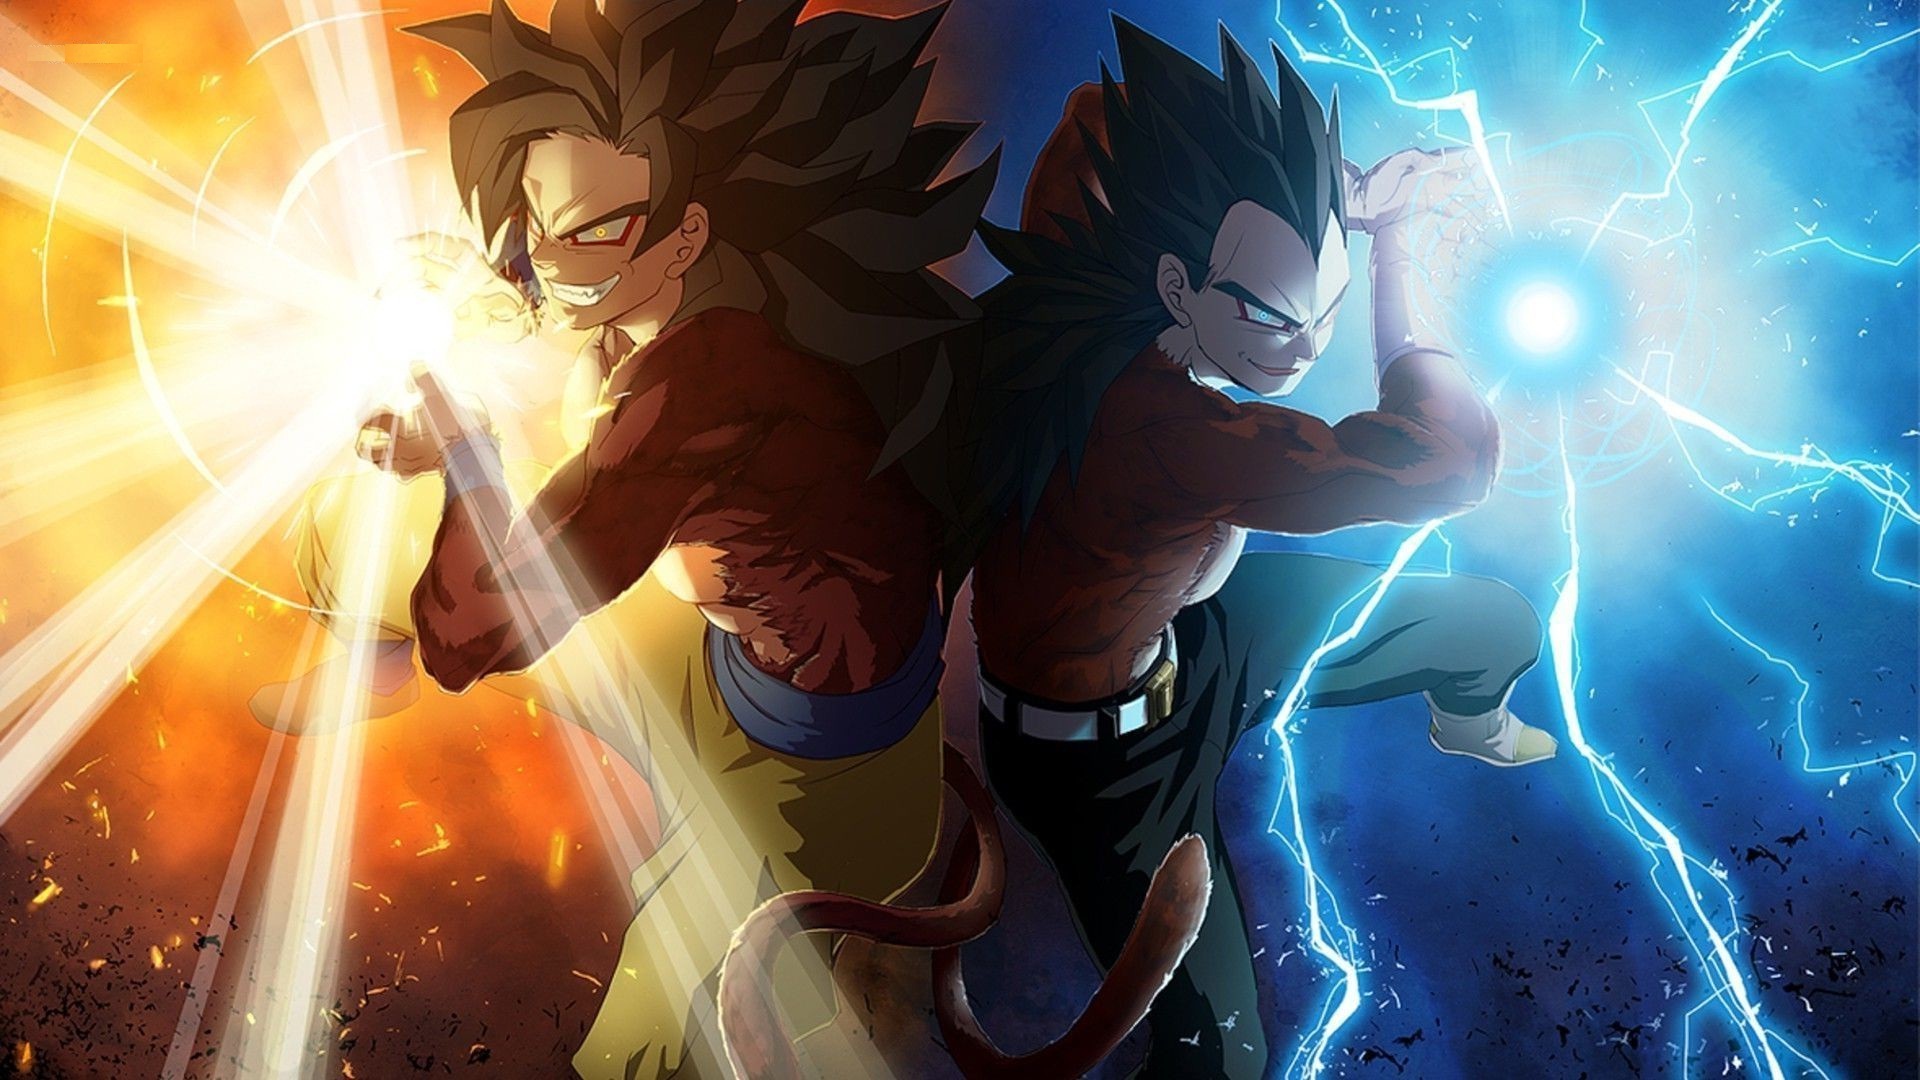 Goku SSJ4 Desktop Backgrounds With Resolution 1920X1080 pixel. You can make this wallpaper for your Desktop Computer Backgrounds, Mac Wallpapers, Android Lock screen or iPhone Screensavers